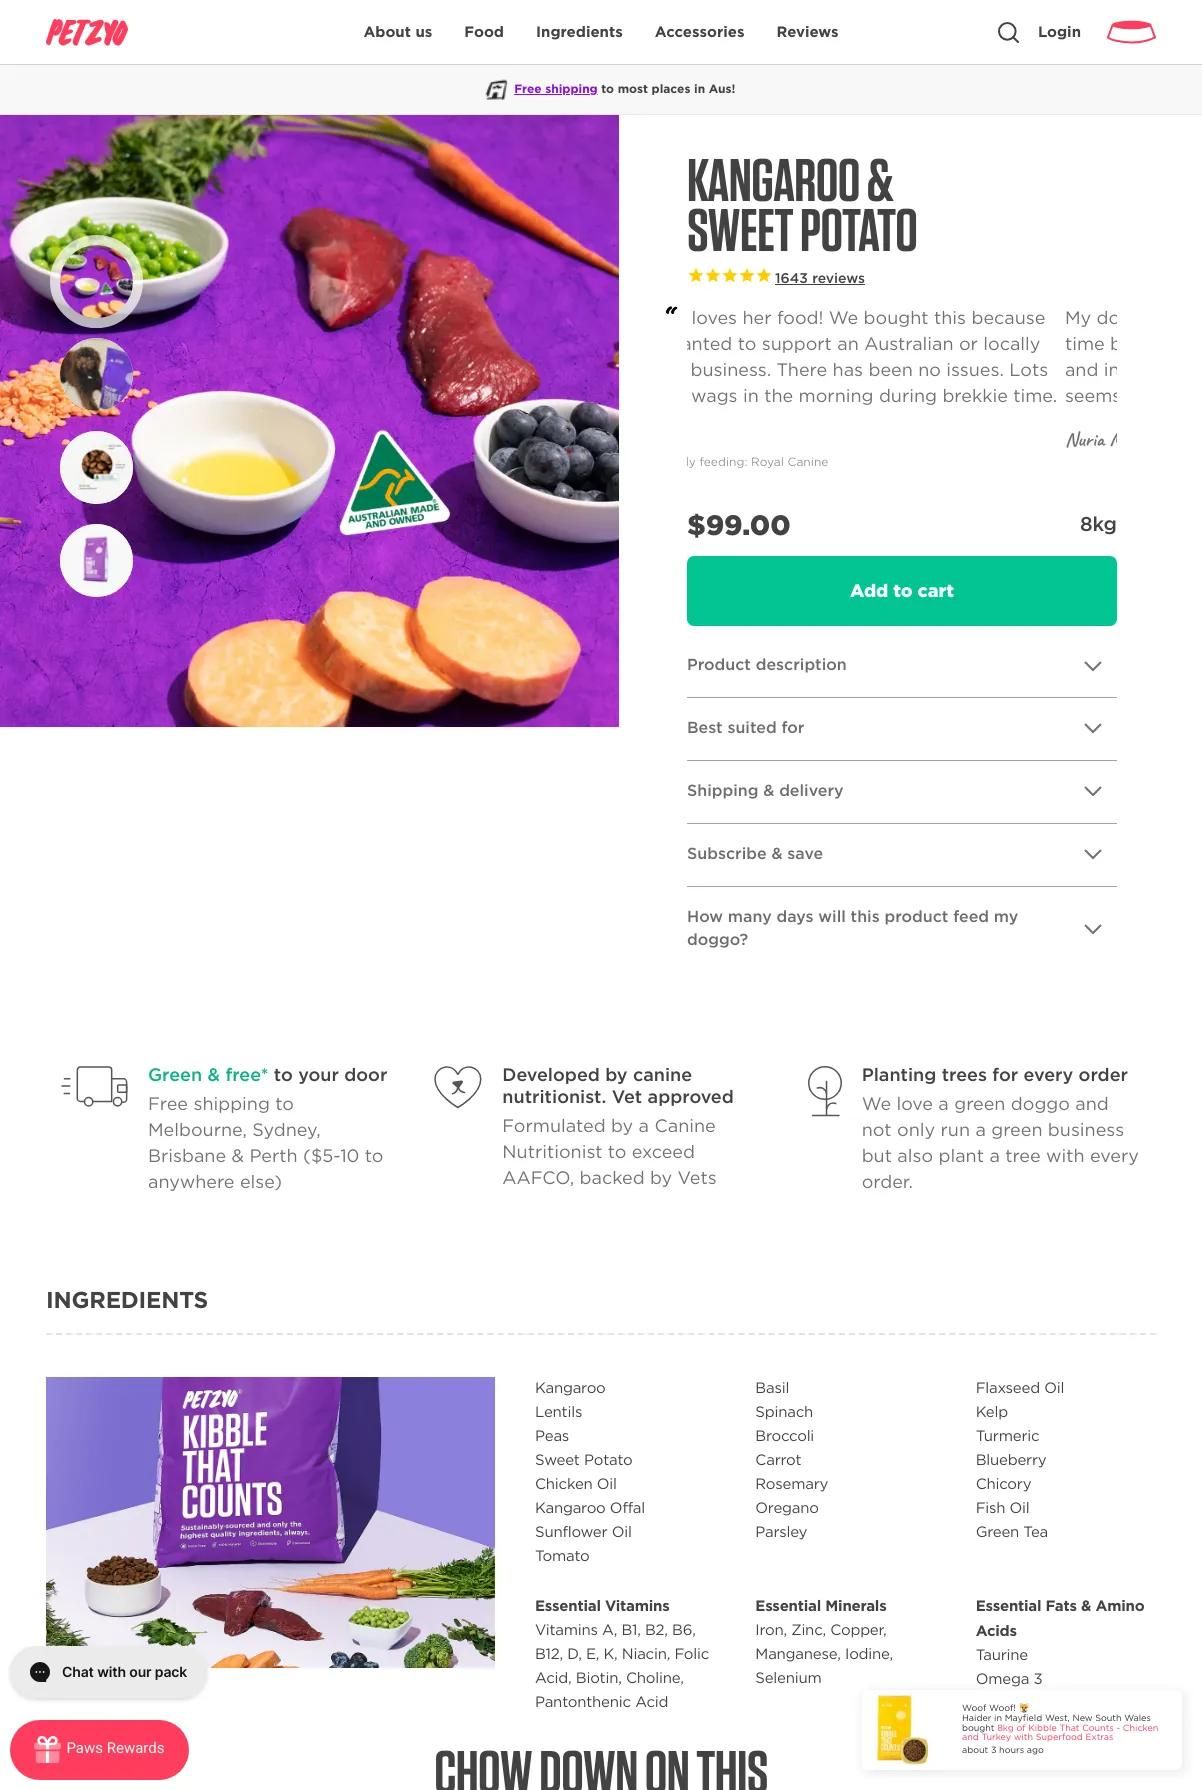 Screenshot 3 of Petzyo (Example Shopify Food and Beverage Website)